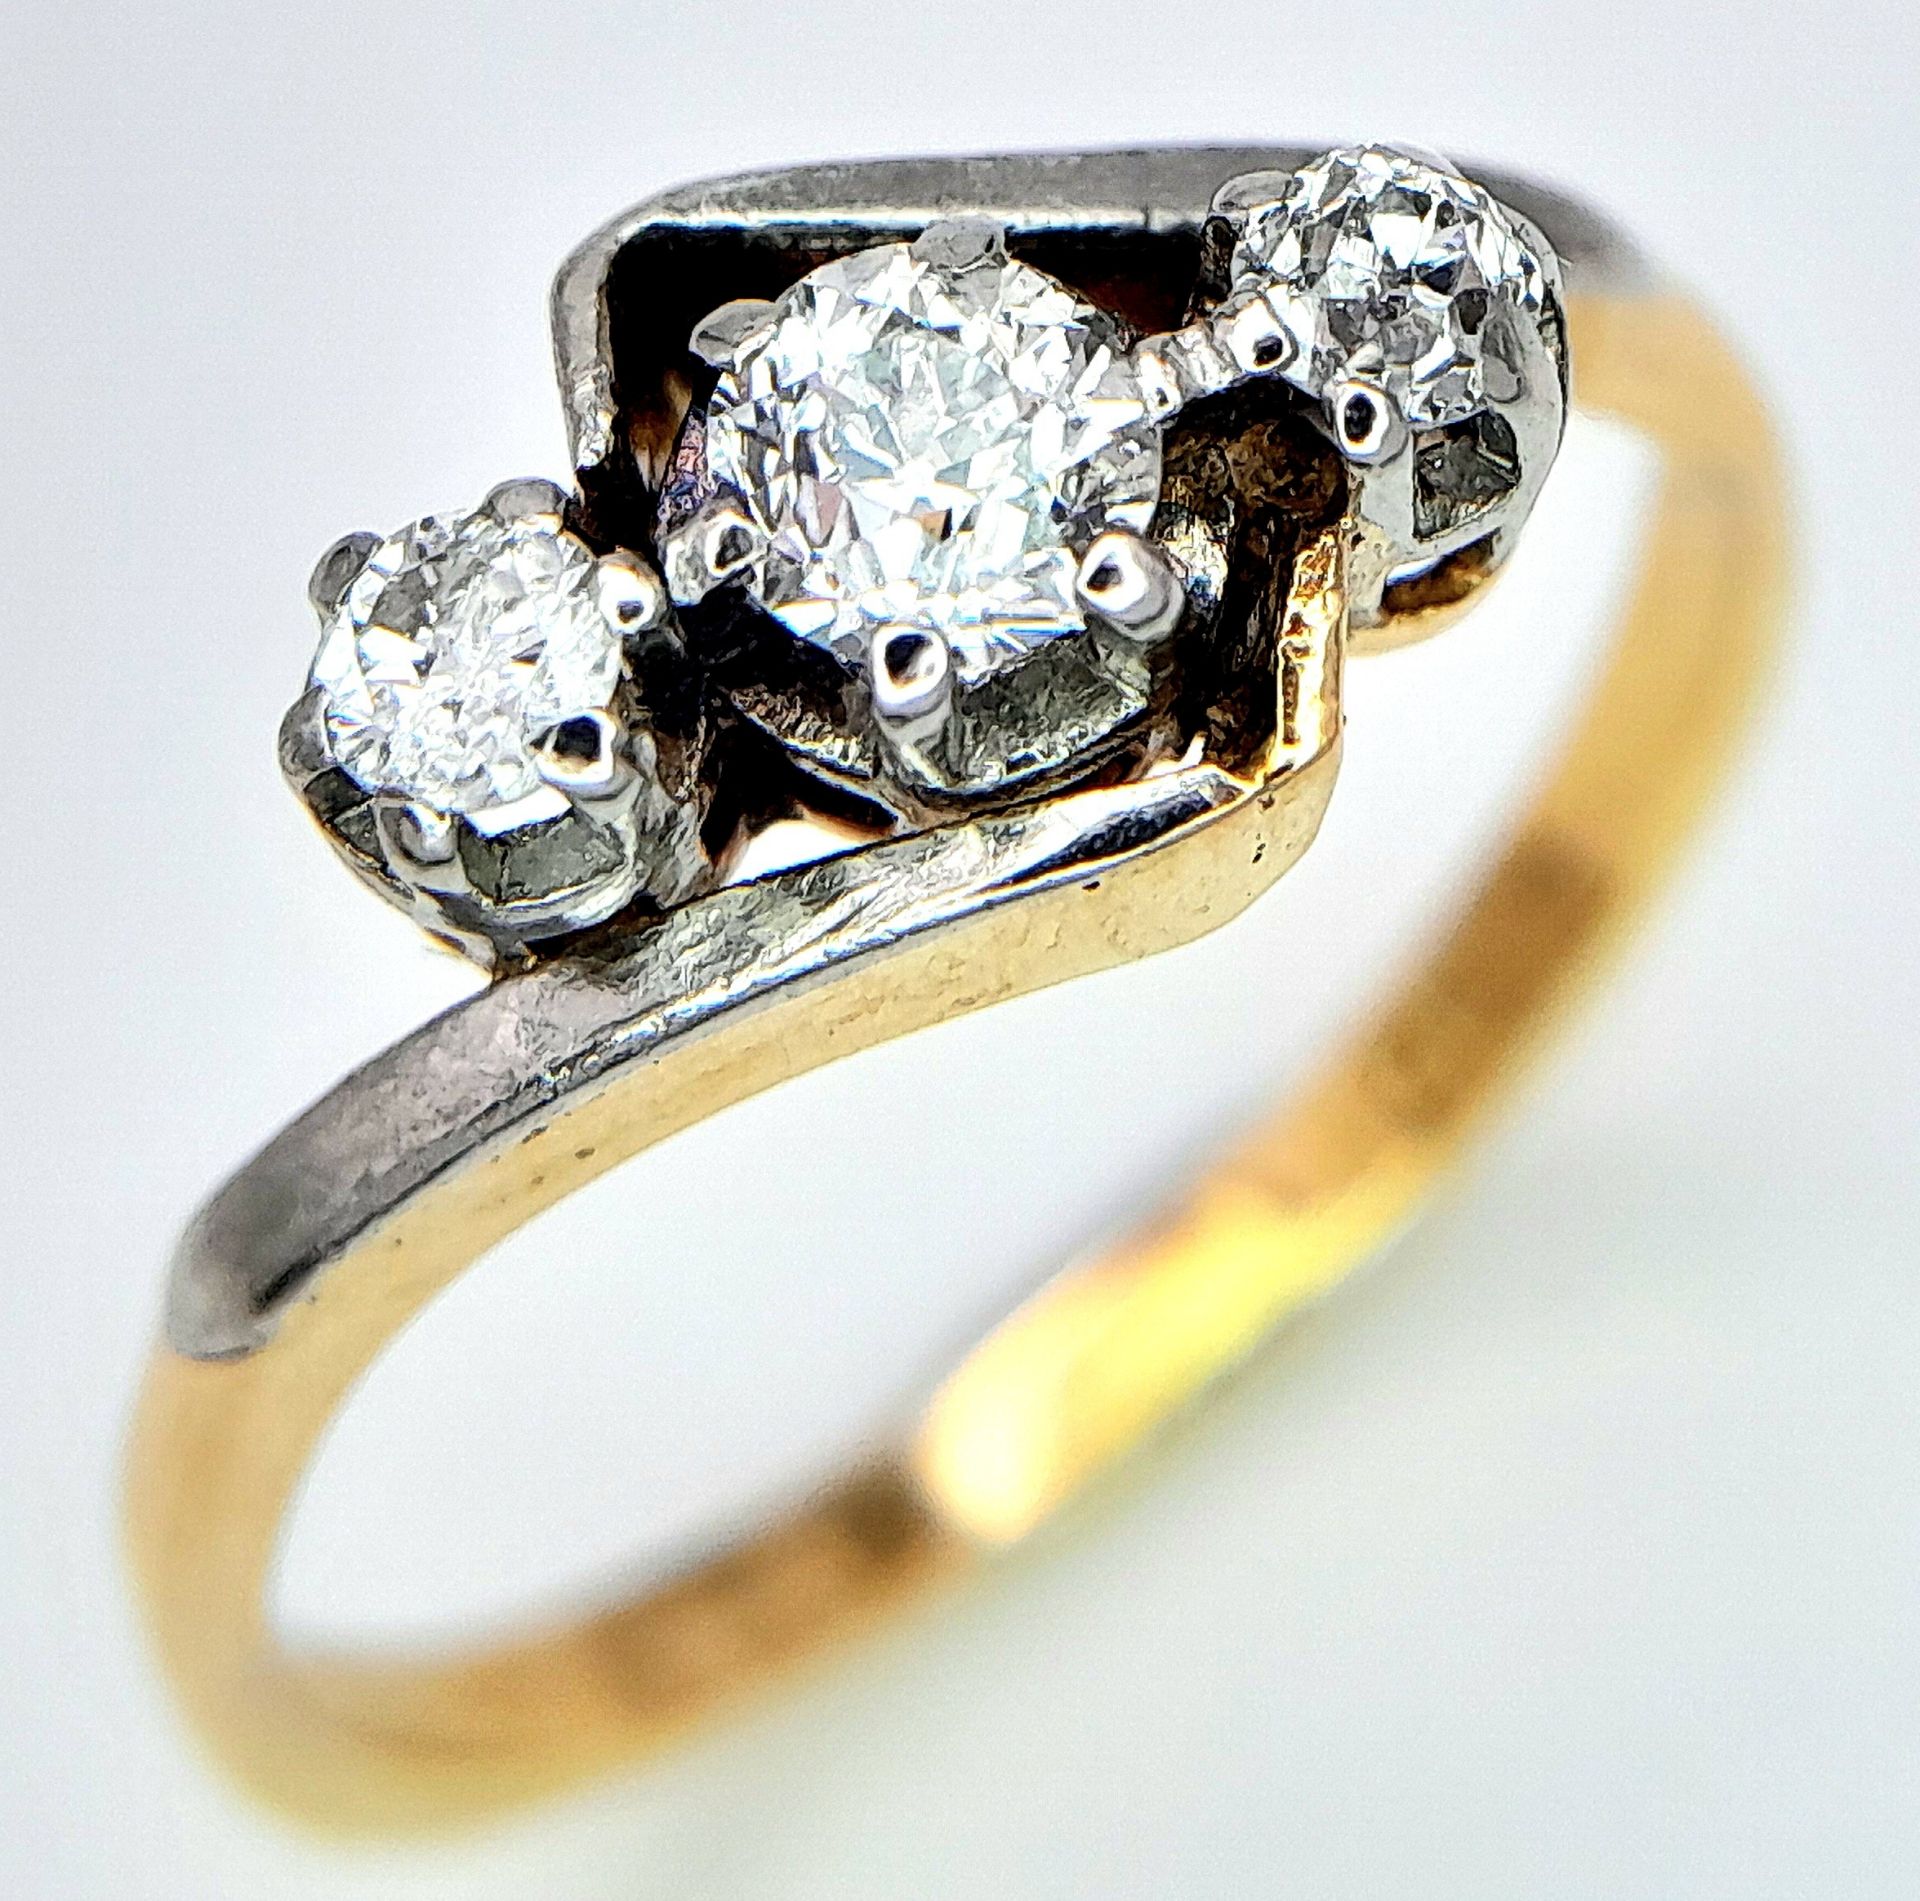 AN 18K YELLOW GOLD, DIAMOND SET, CROSSOVER 3 STONE RING. 0.25CT. 2.8G. SIZE L - Image 3 of 6